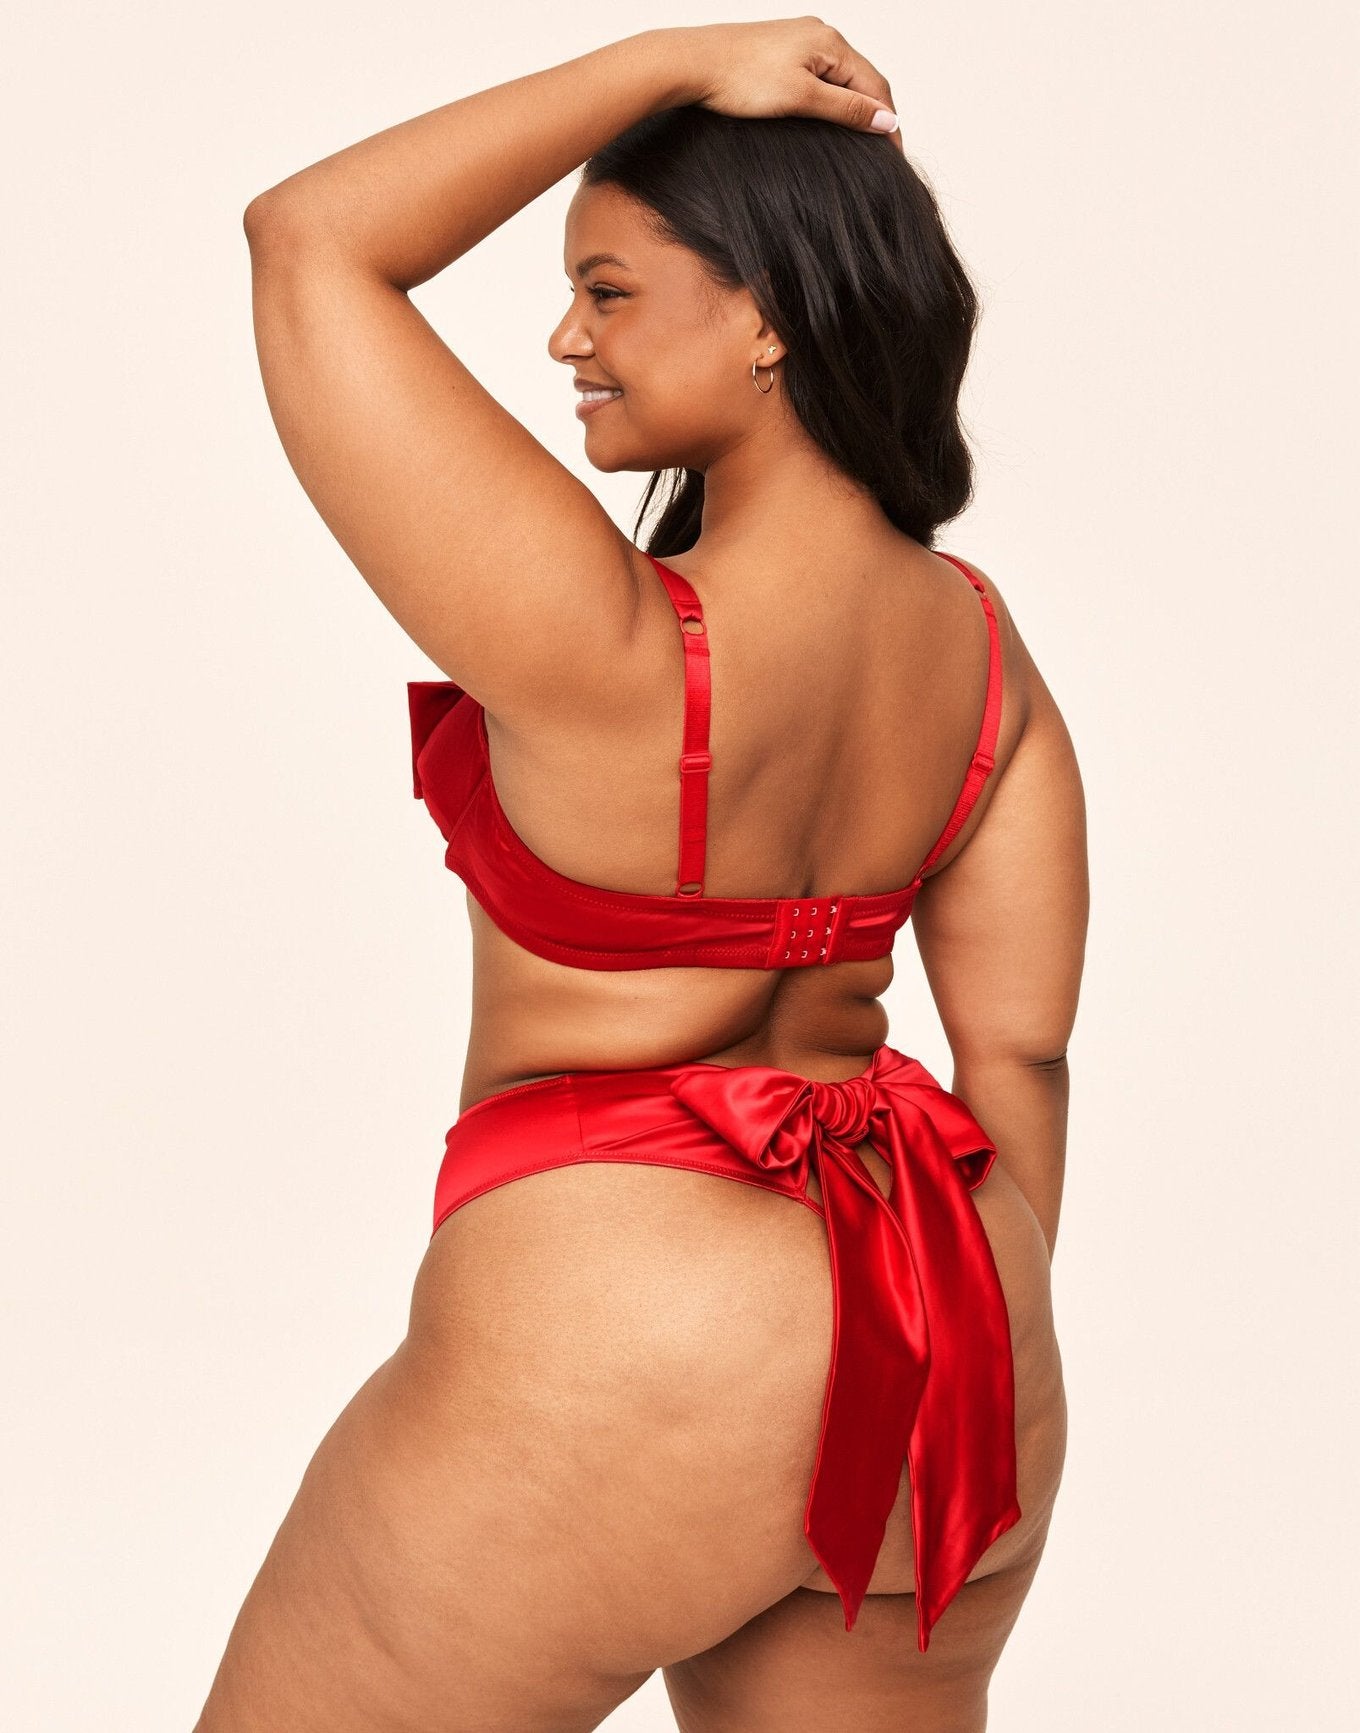 Adore Me Gynger Unlined Balconette in color True Red and shape balconette